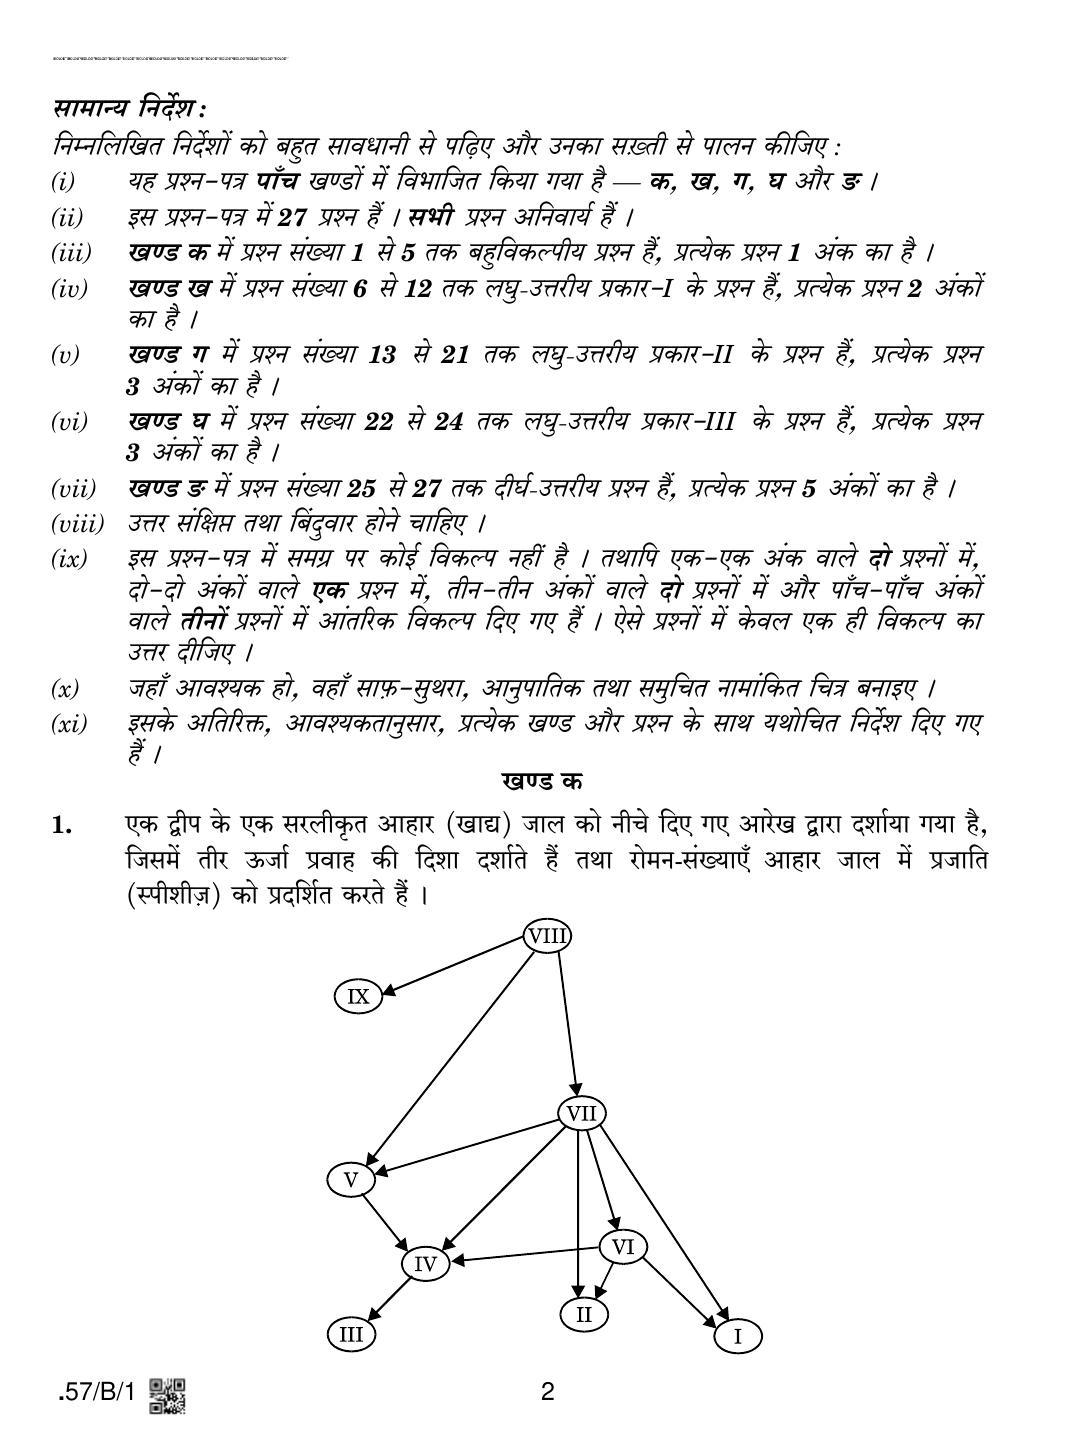 CBSE Class 12 57-C-1 - Biology 2020 Compartment Question Paper - Page 2